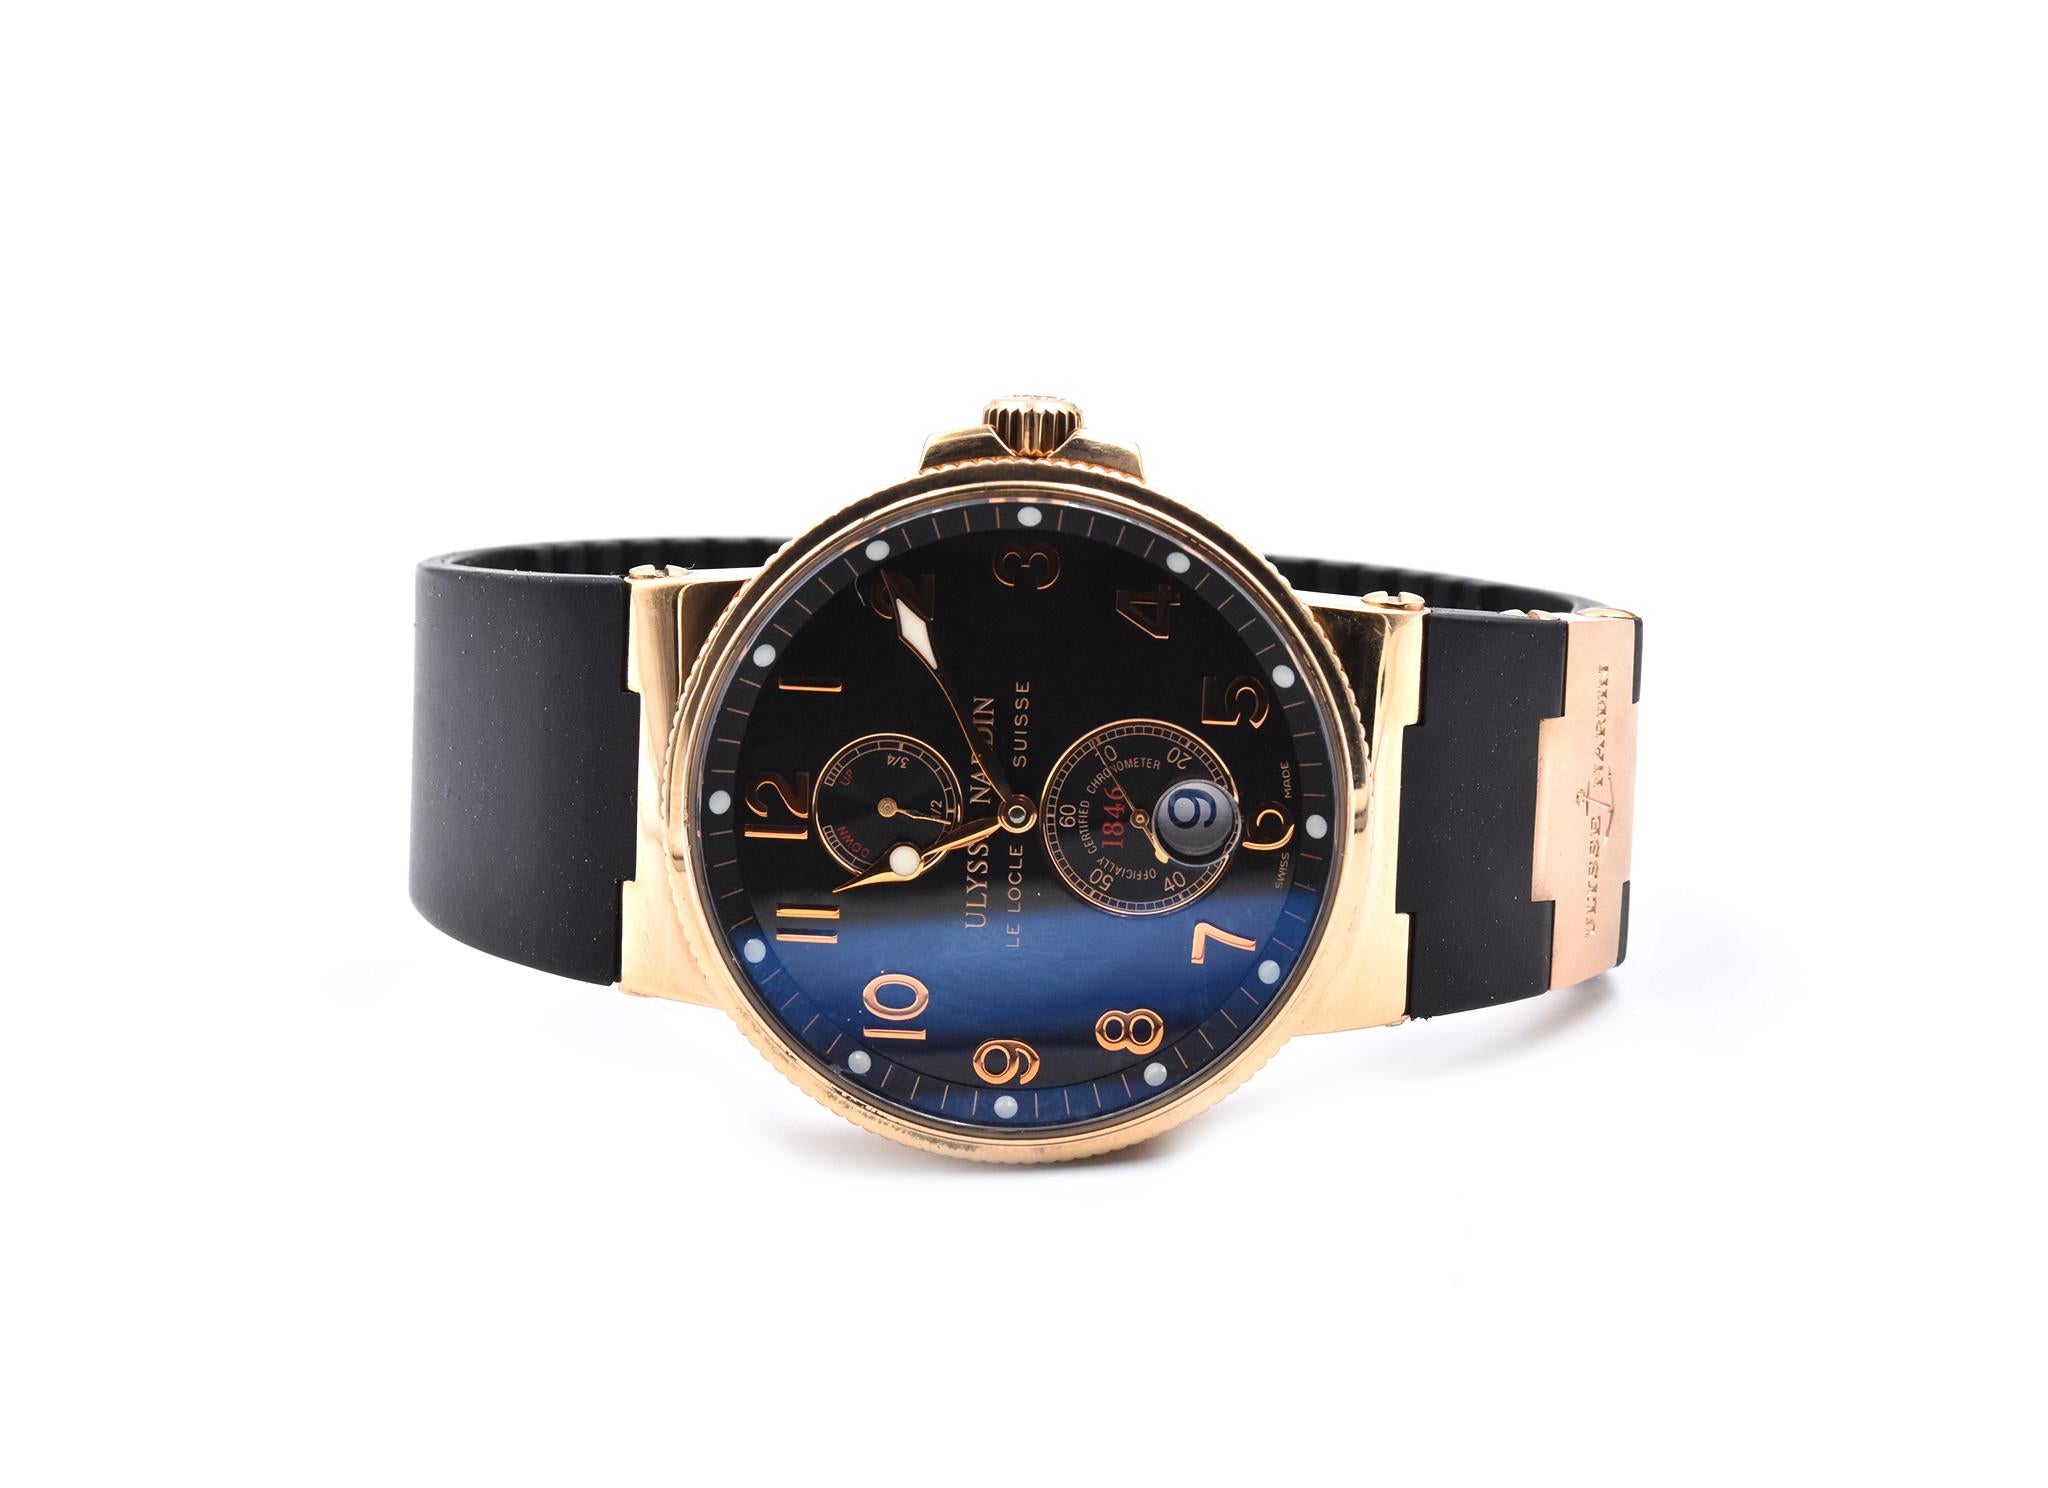 Movement: automatic
Function: hours, minutes, small seconds, date power reserve indicator
Case: 43mm 18k rose gold round case, sapphire crystal, pull/push crown
Band: black rubber strap with rose gold buckle
Dial: black dial with rose gold Arabic